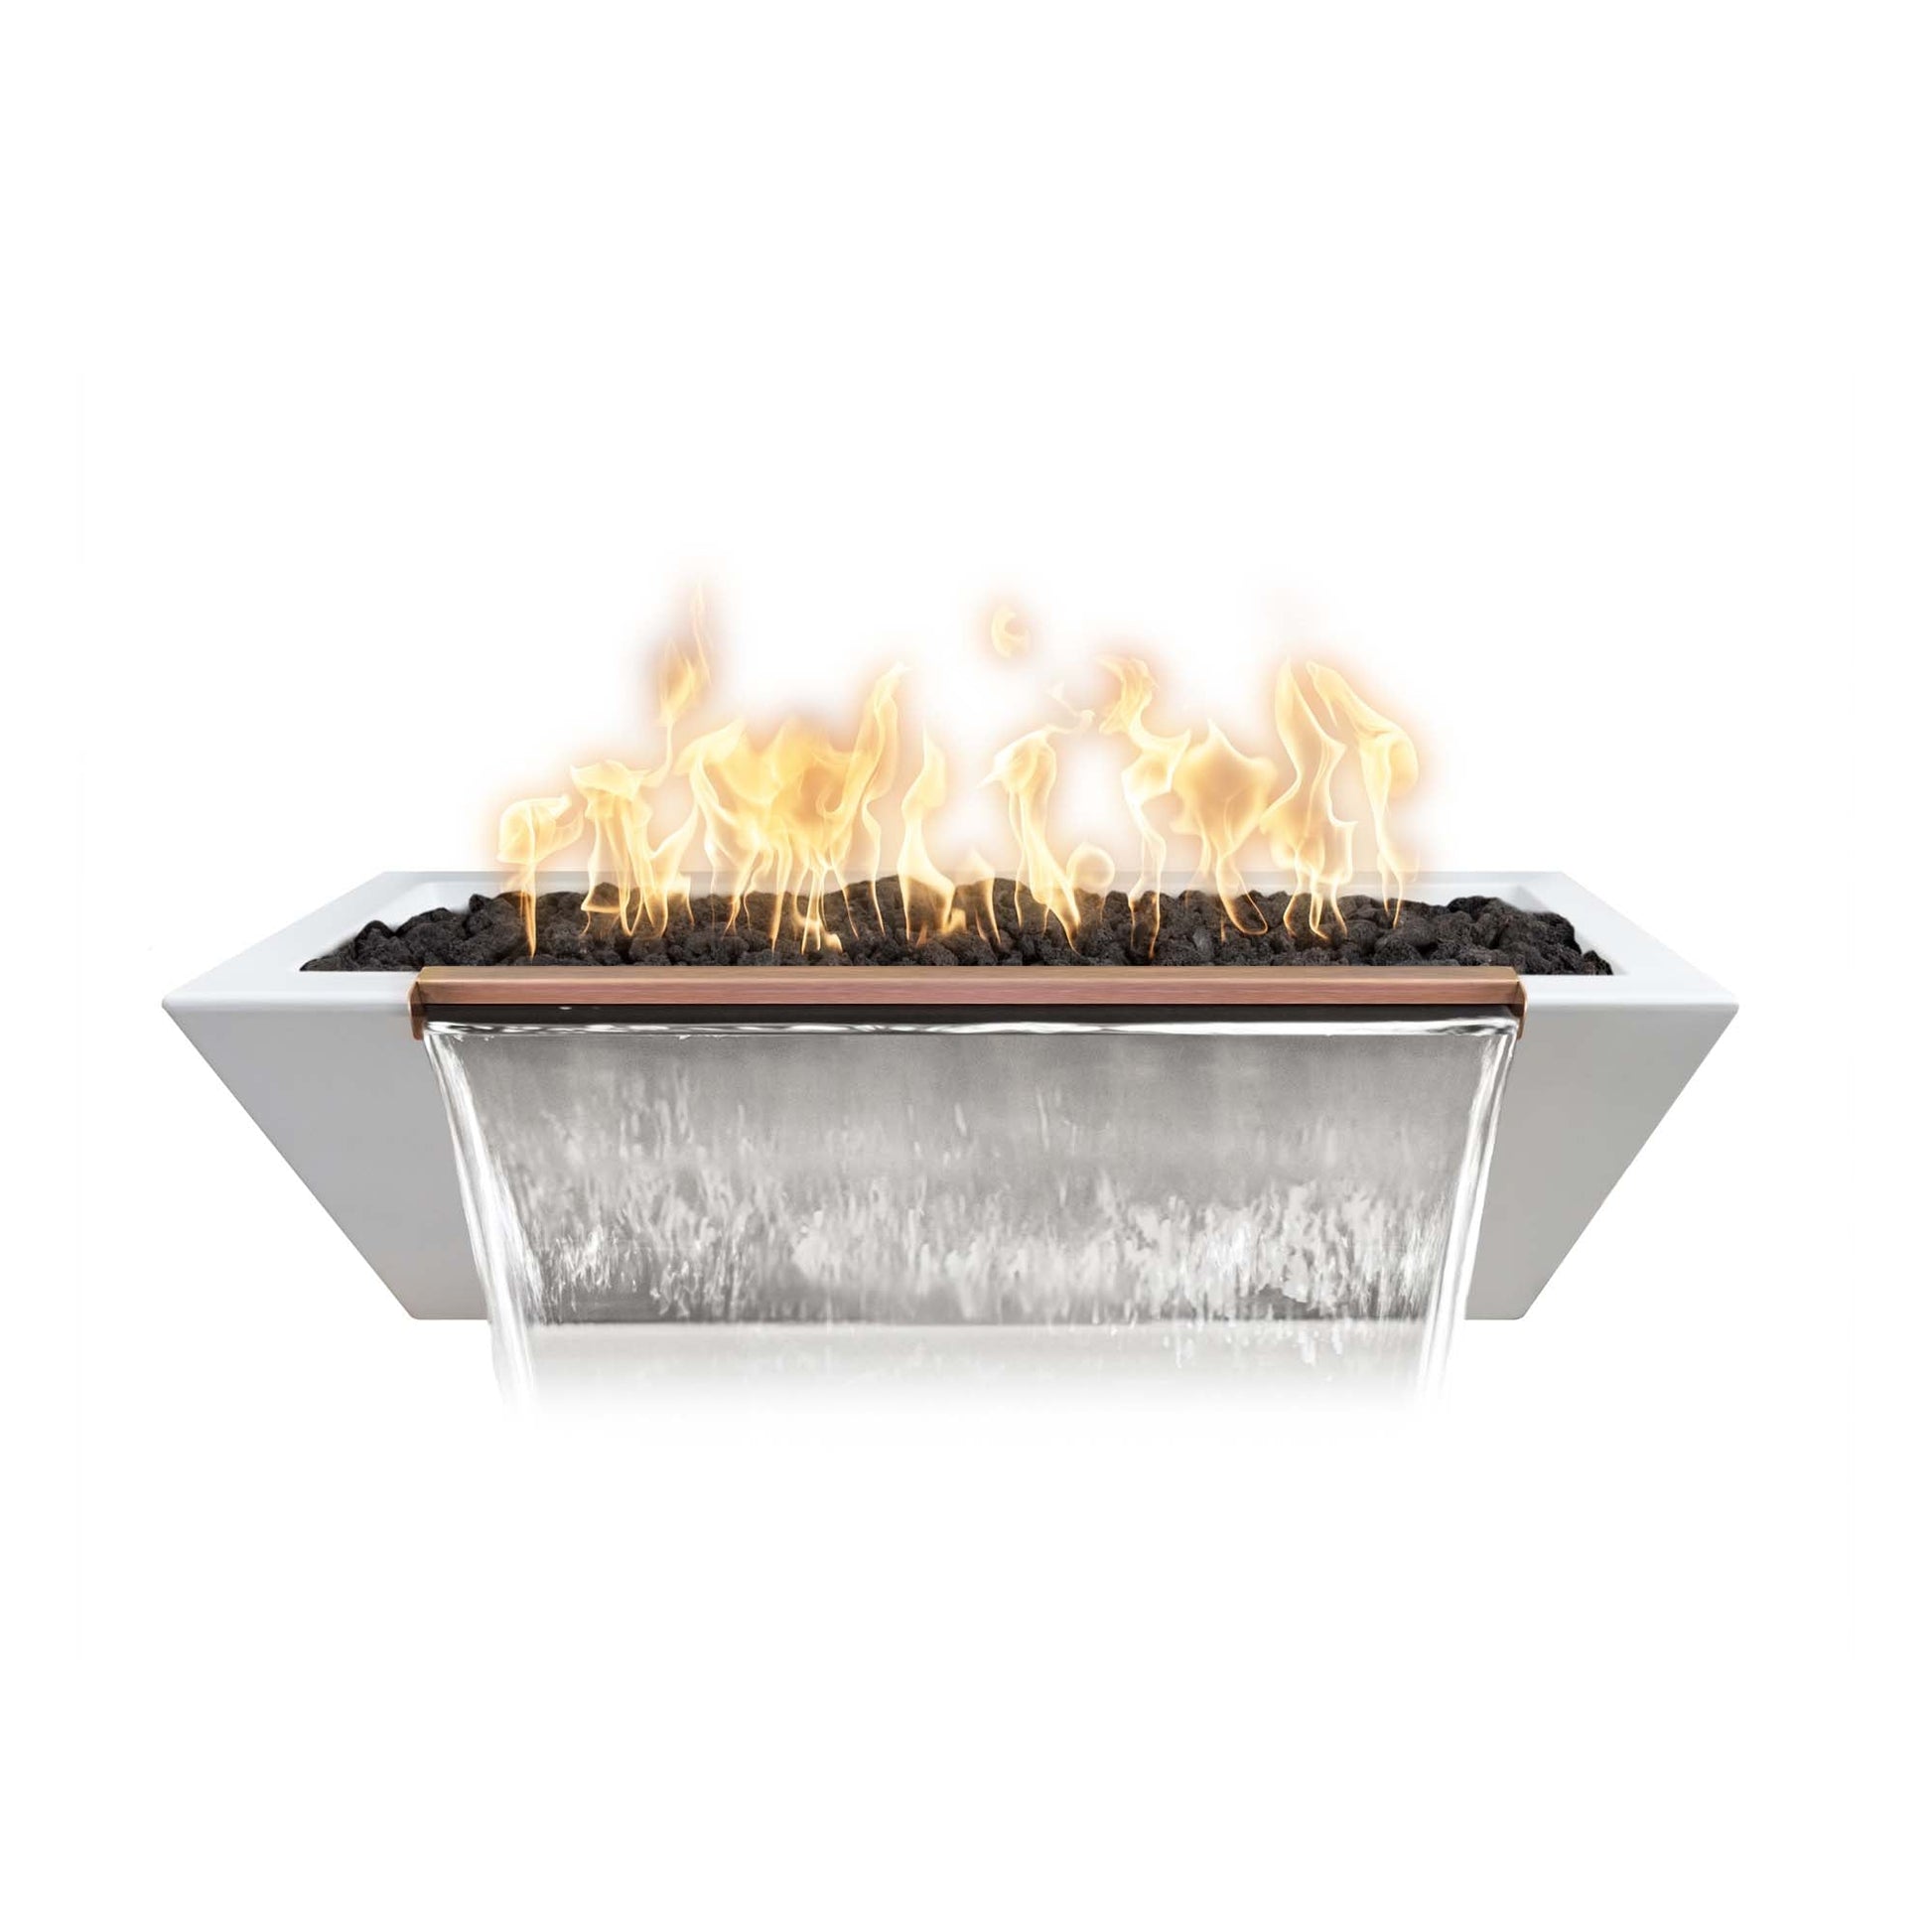 The Outdoor Plus Linear Maya 60" Rustic Coffee GFRC Concrete Liquid Propane Fire & Water Bowl with Match Lit with Flame Sense Ignition